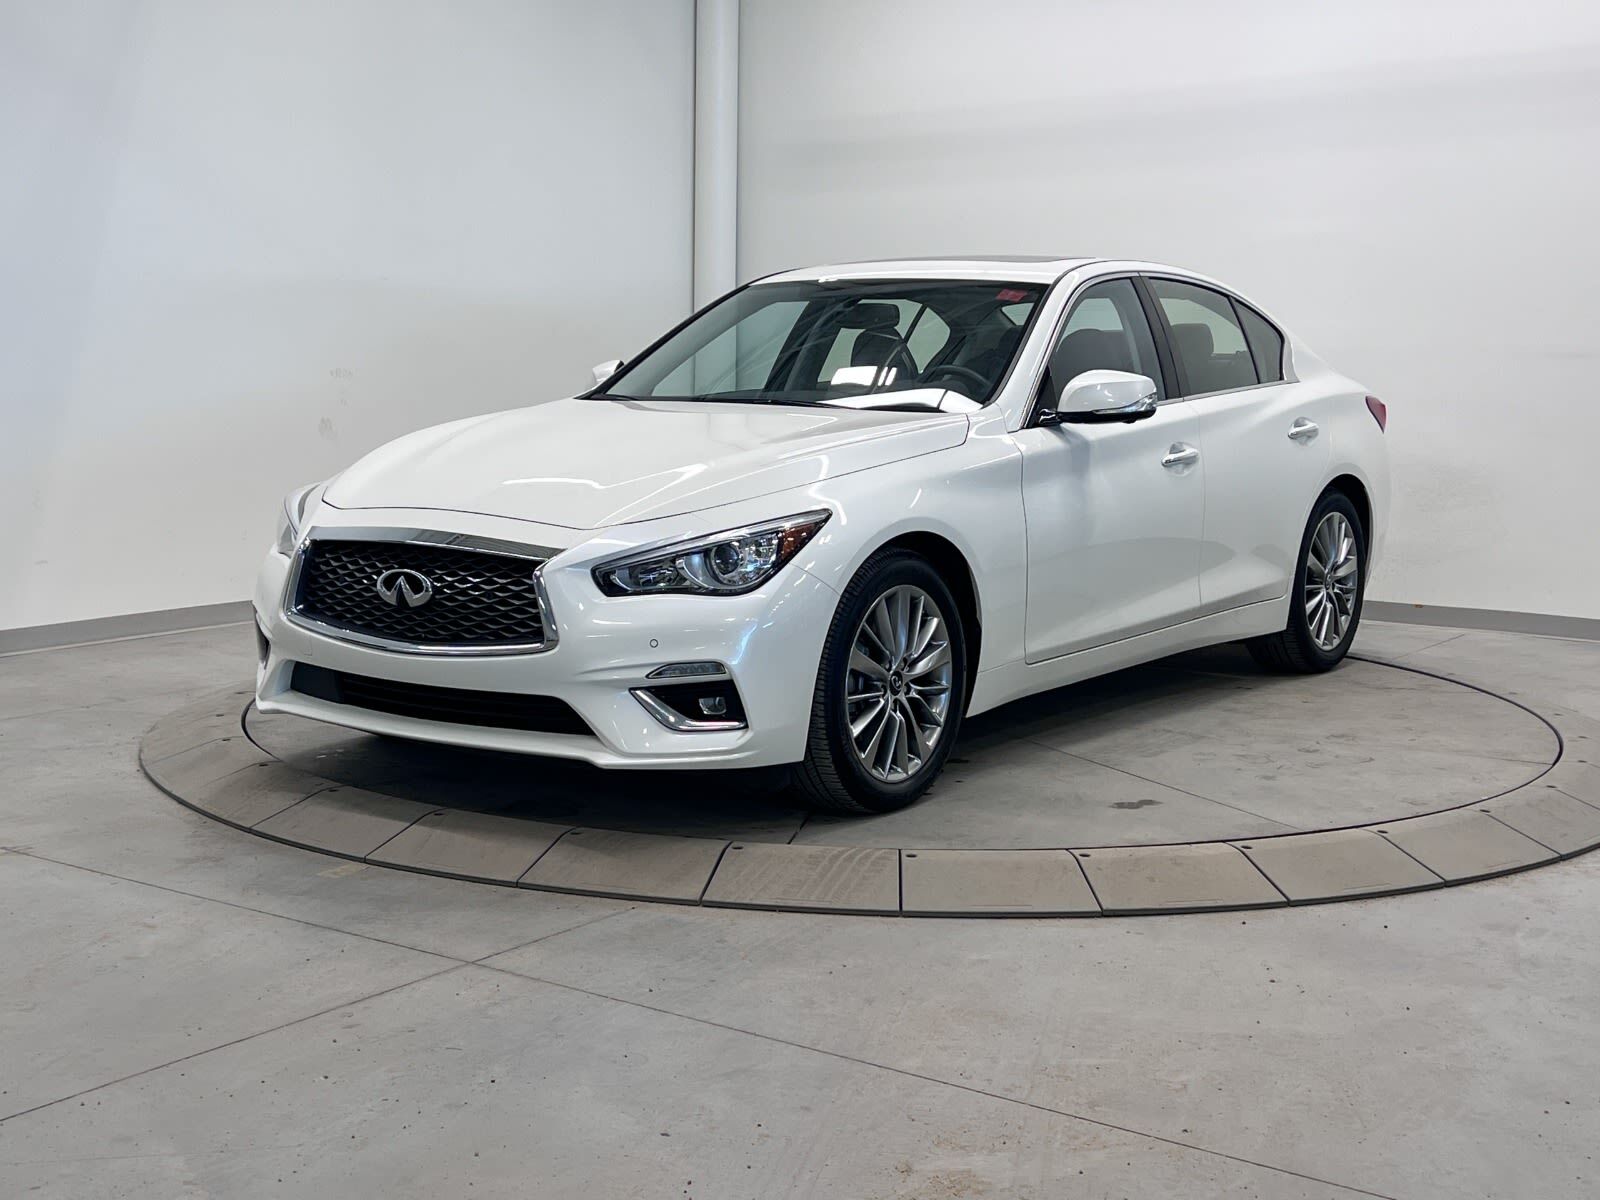 2022 Infiniti Q50 LUXE - MARCH MADNESS!